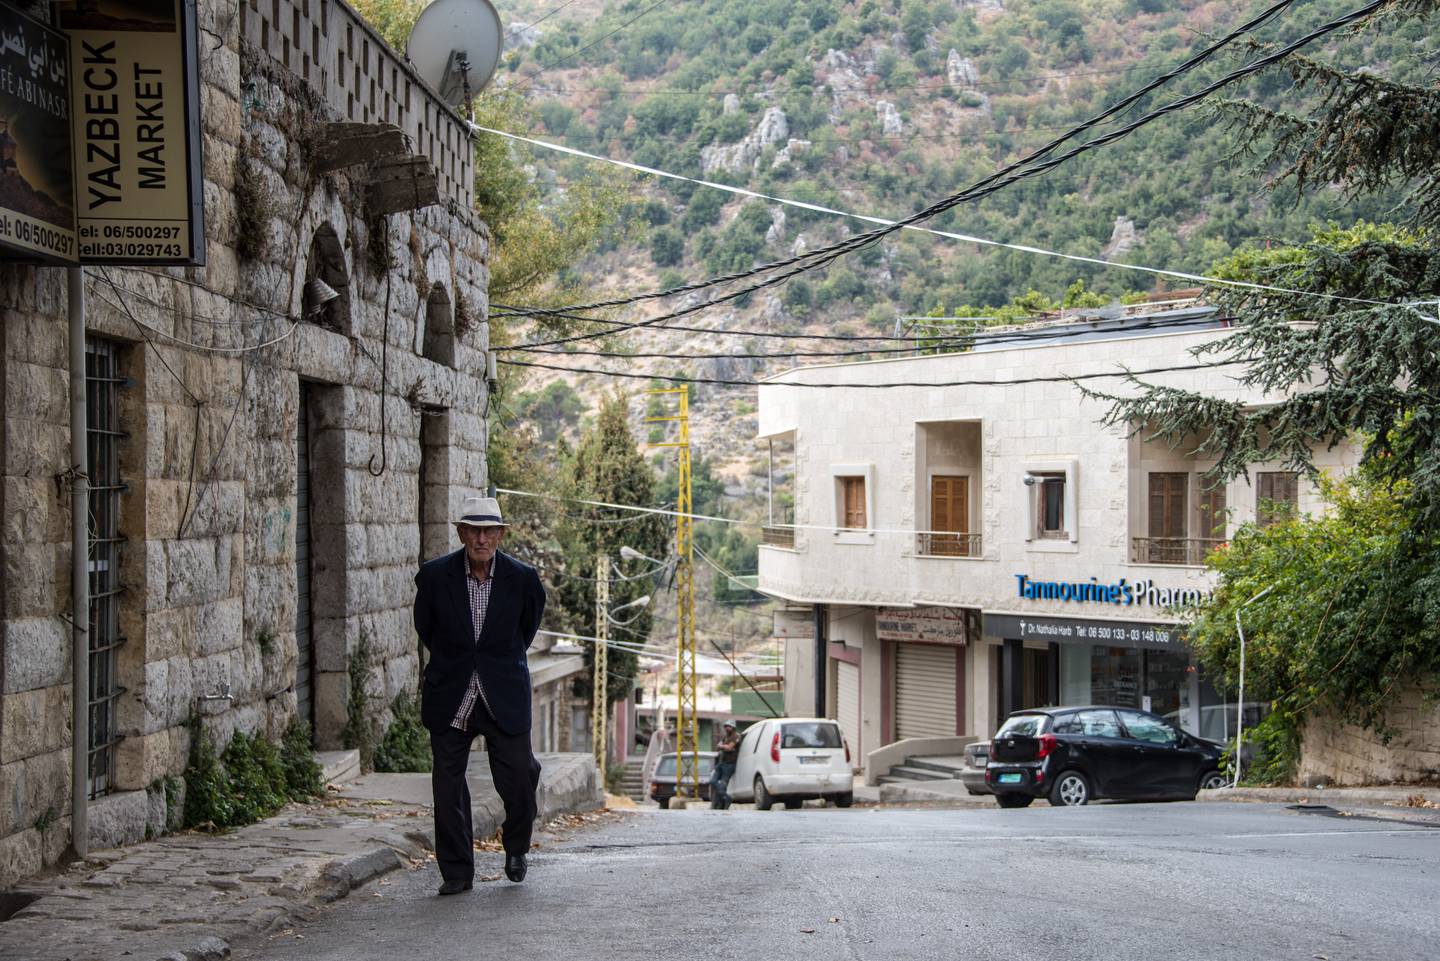 An old man walks past the pharmacy and on up Tannourine high street. Picture: Elizabeth Fitt 